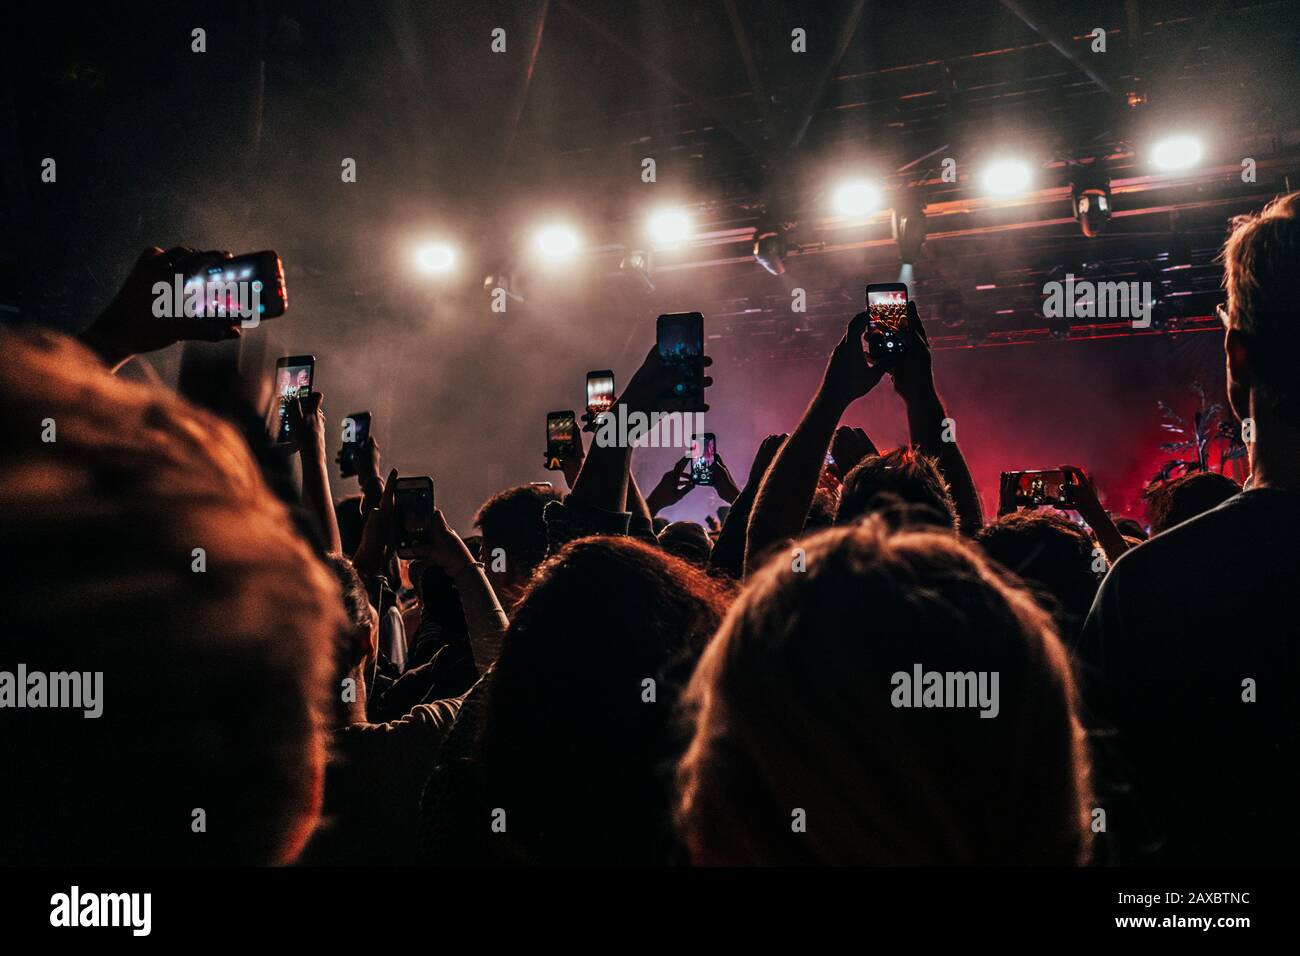 Crowd with smart phones filming music concert Stock Photo